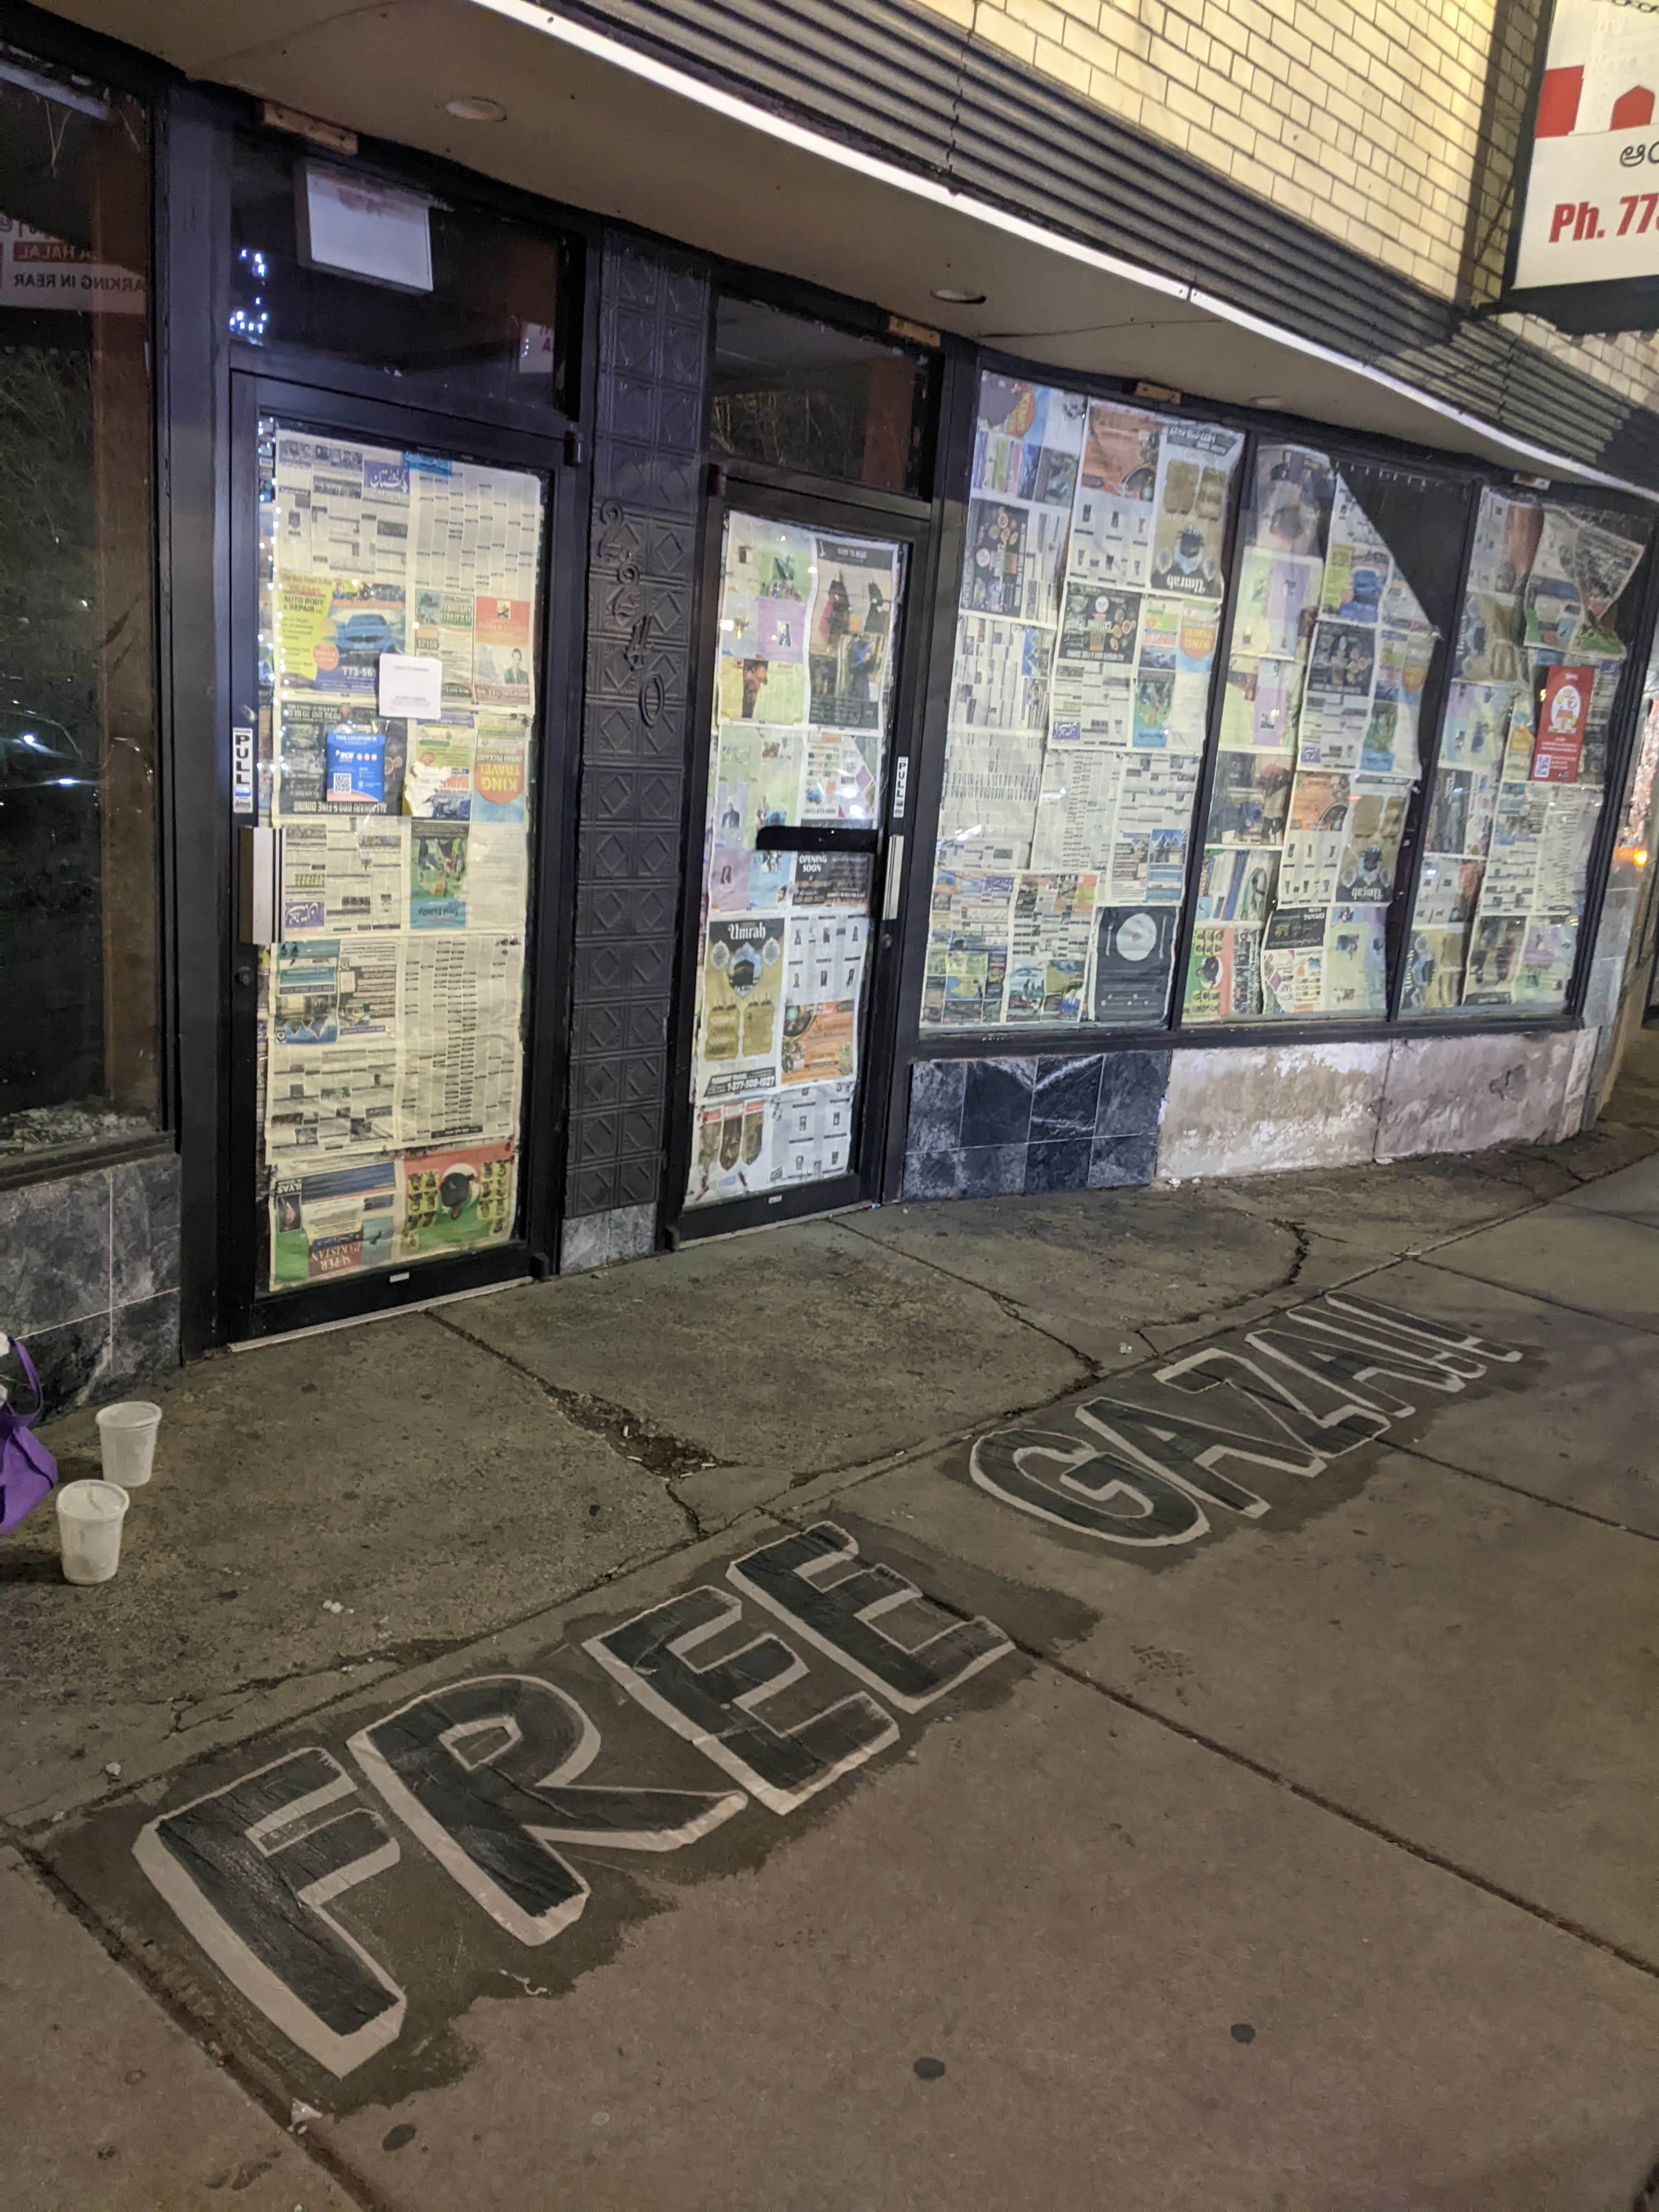 photo of the words 'free gaza' wheatpasted on the sidewalk